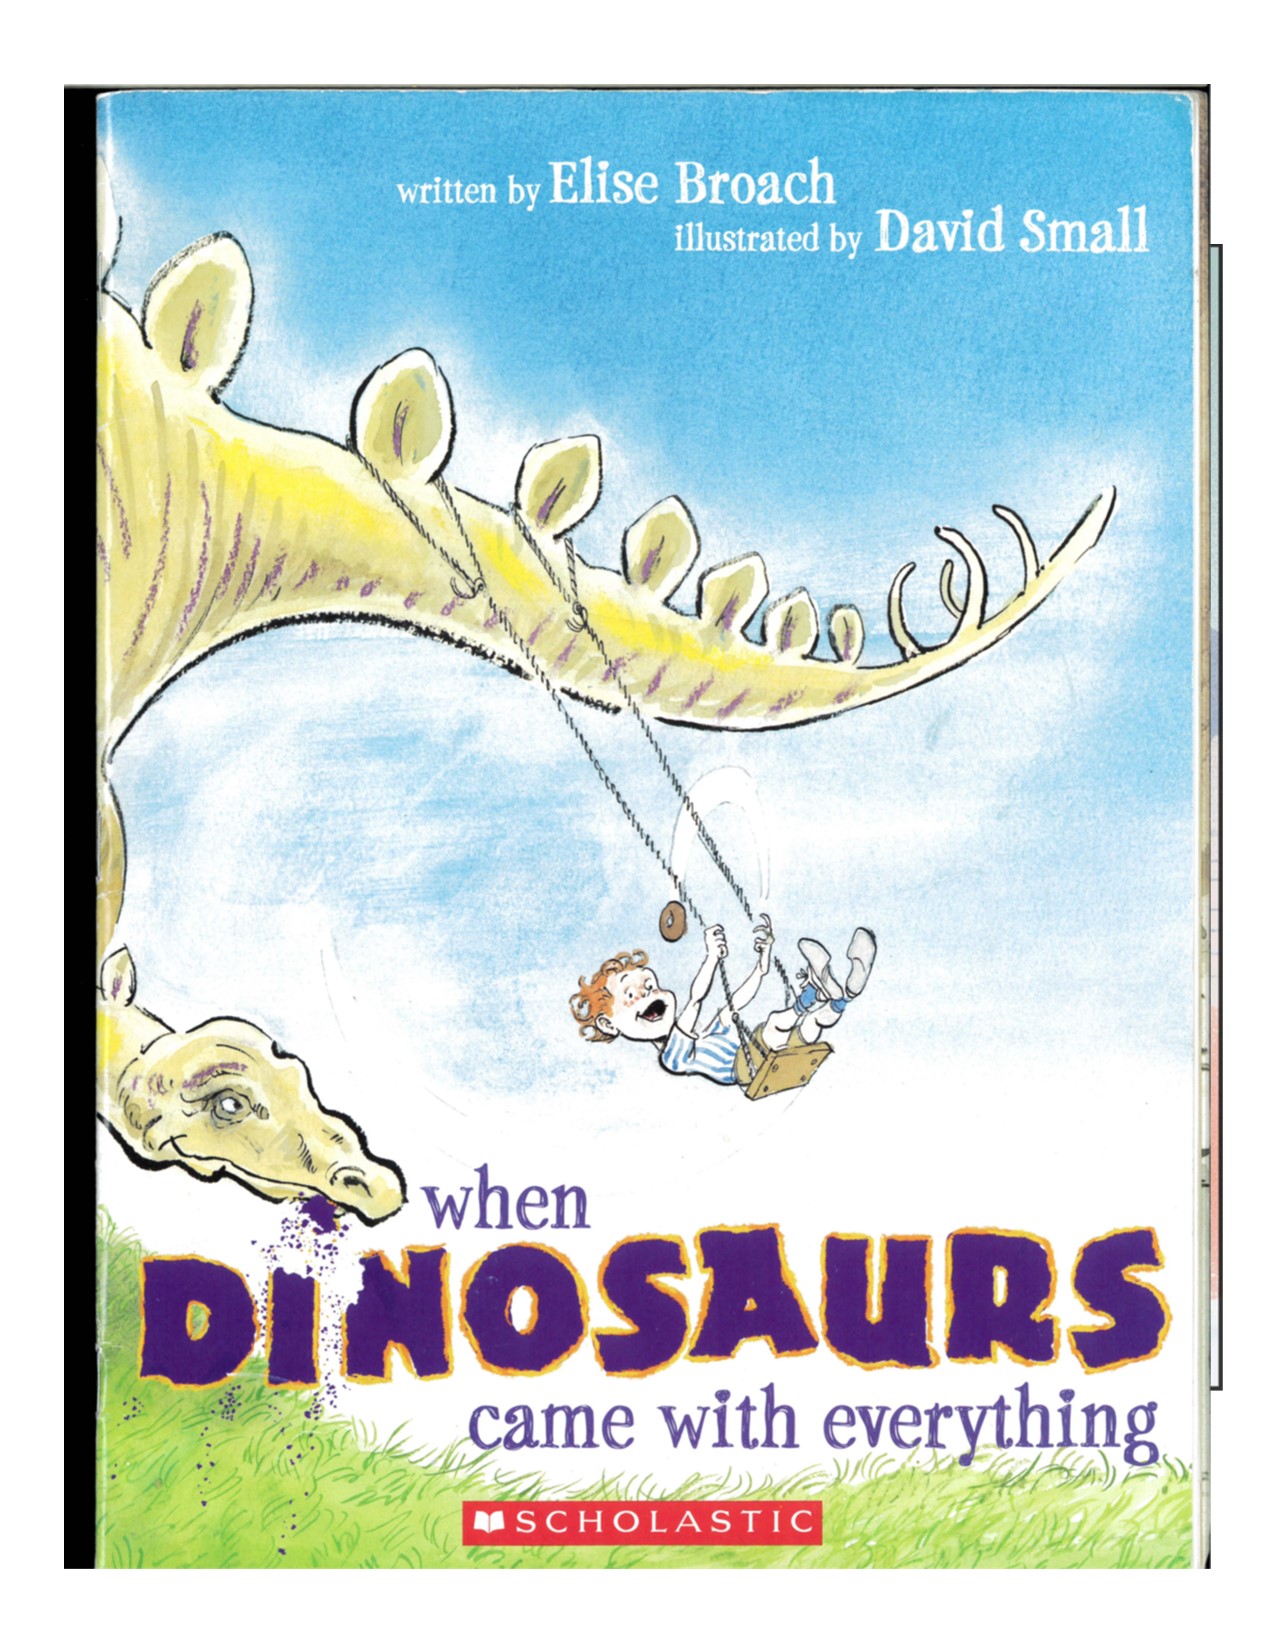 When dinosaurs ... book cover